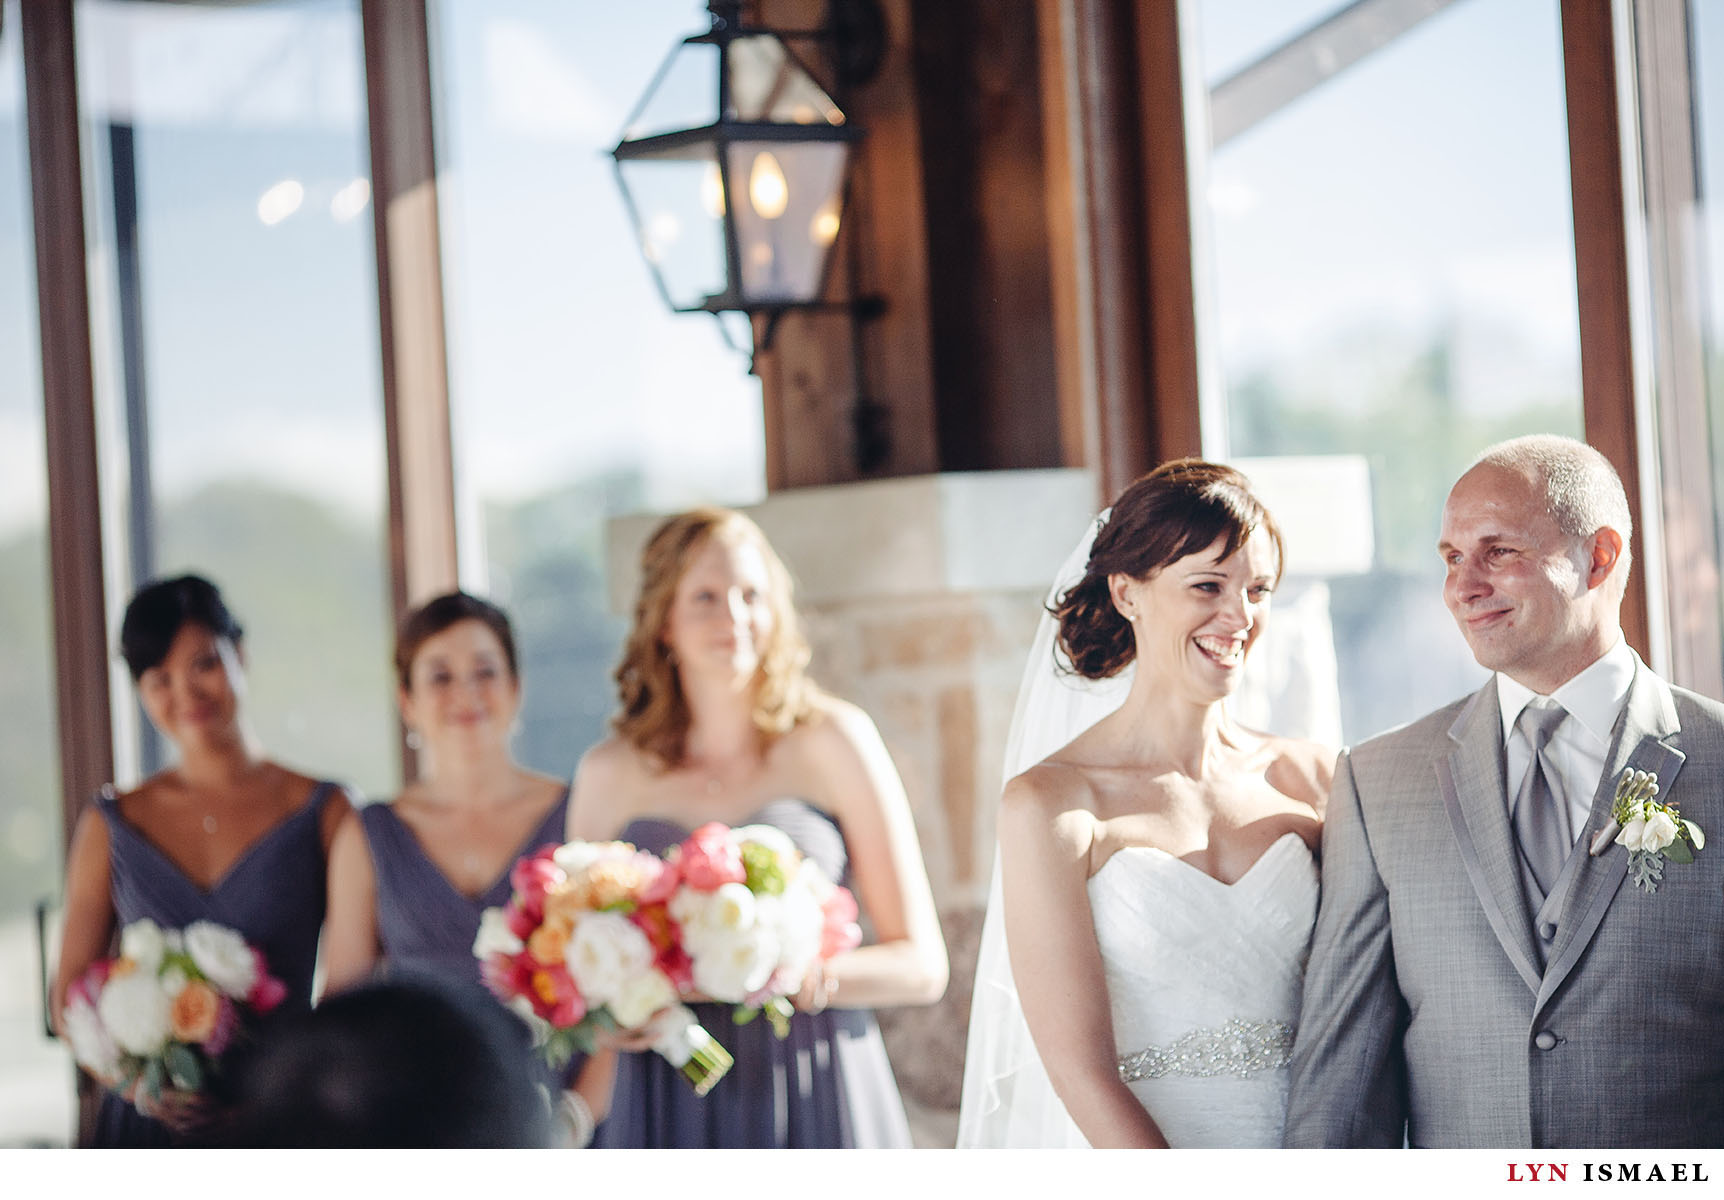 A wedding ceremony at the Cambridge Mill